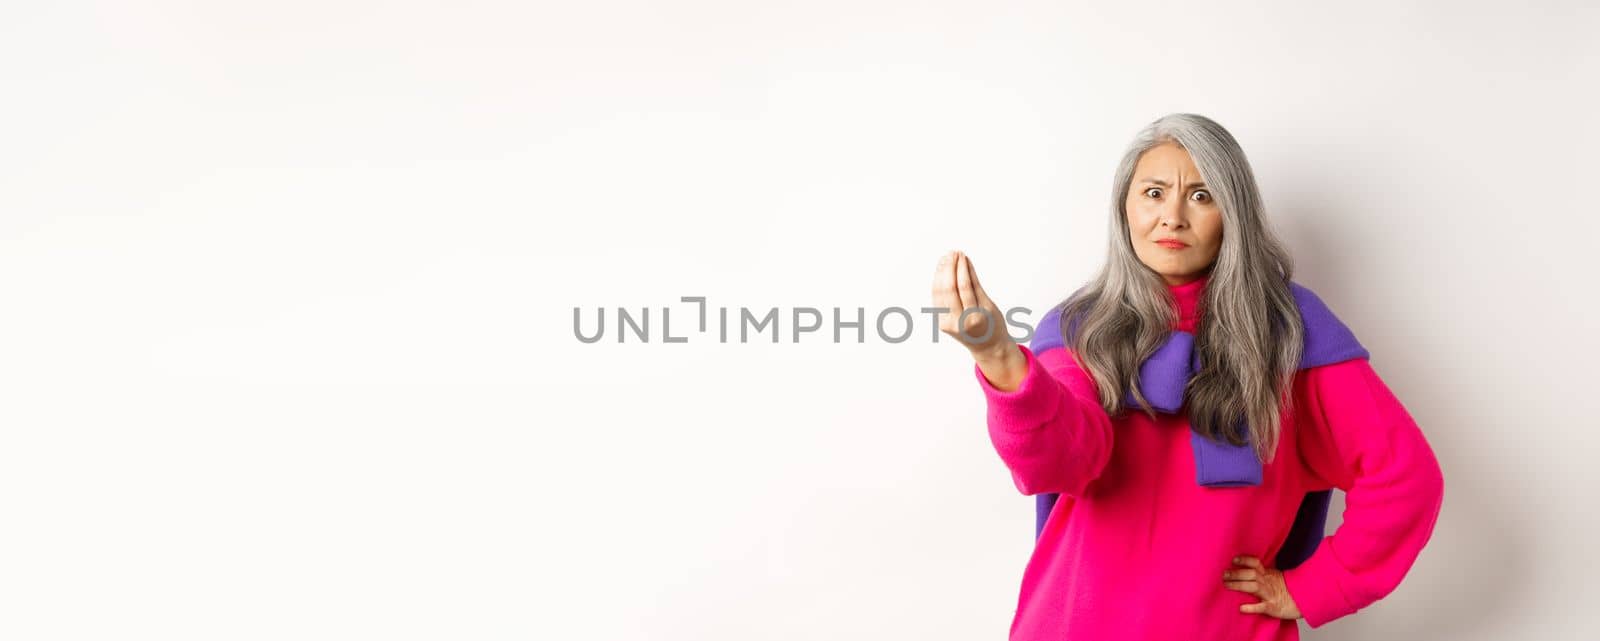 Funny asian woman staring angry and confused, shaking fingers, standing grumpy against white background. Copy space